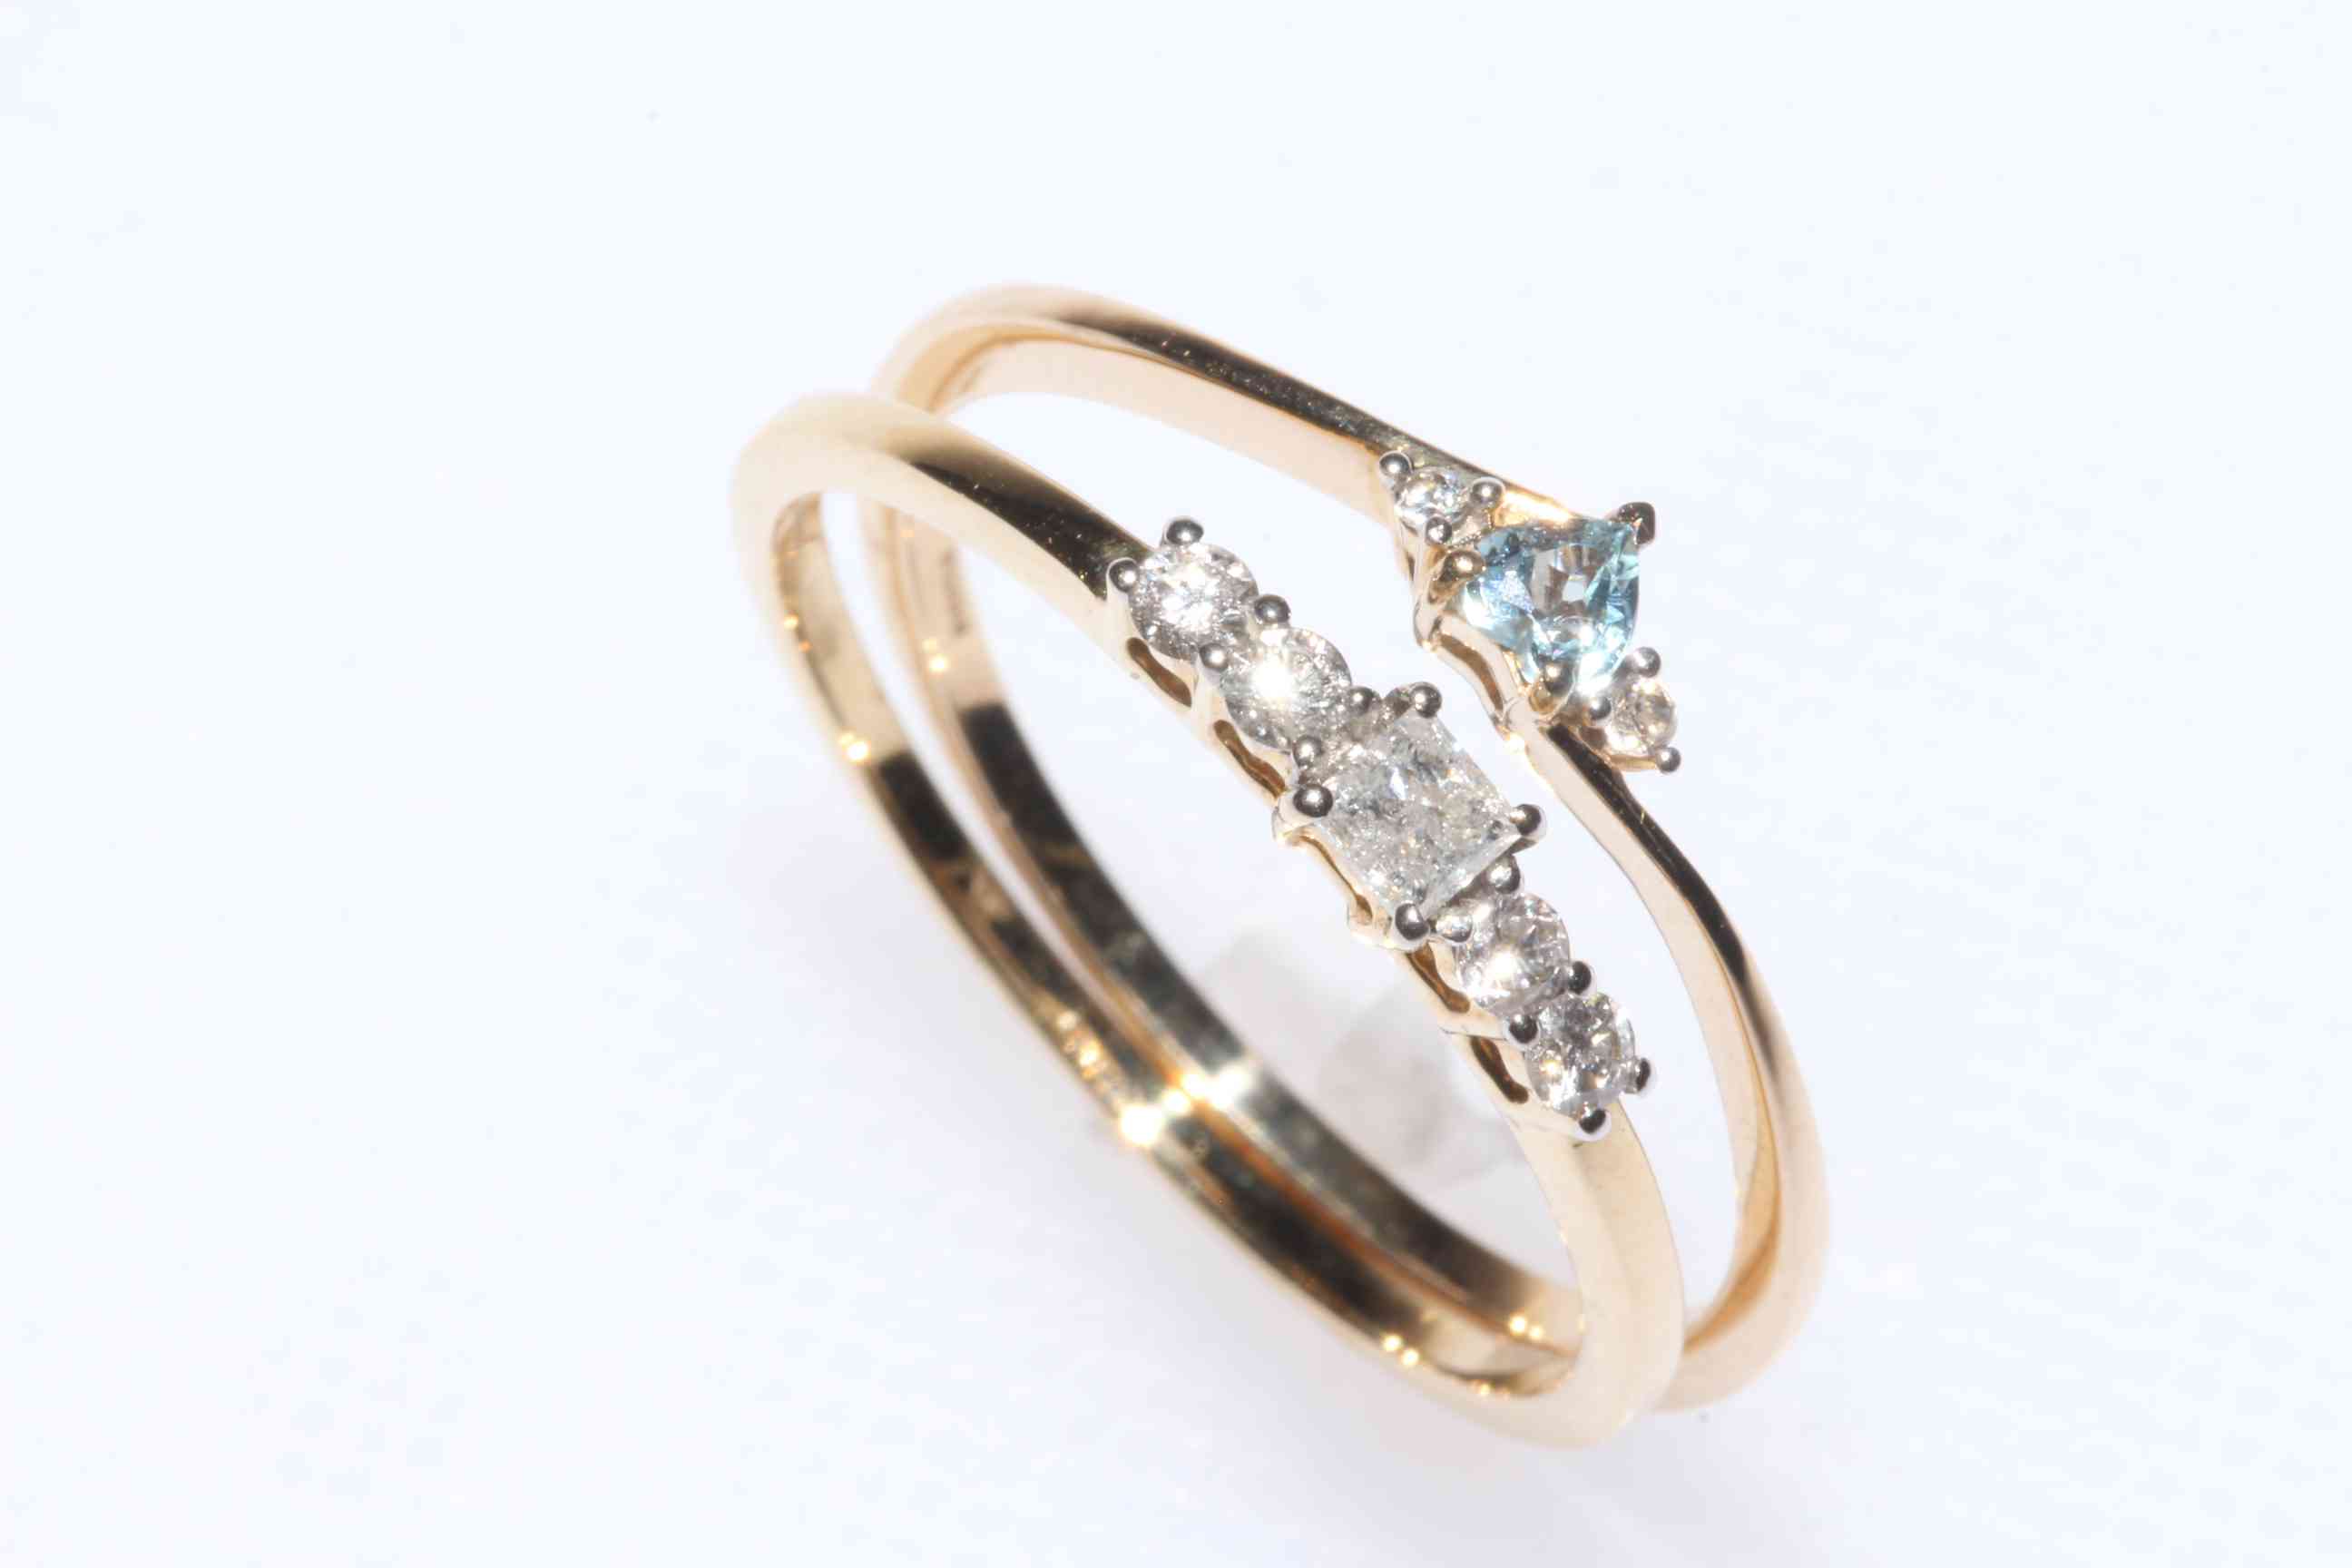 9k gold five stone diamond ring, and 9k gold aquamarine and zircon ring, sizes S,